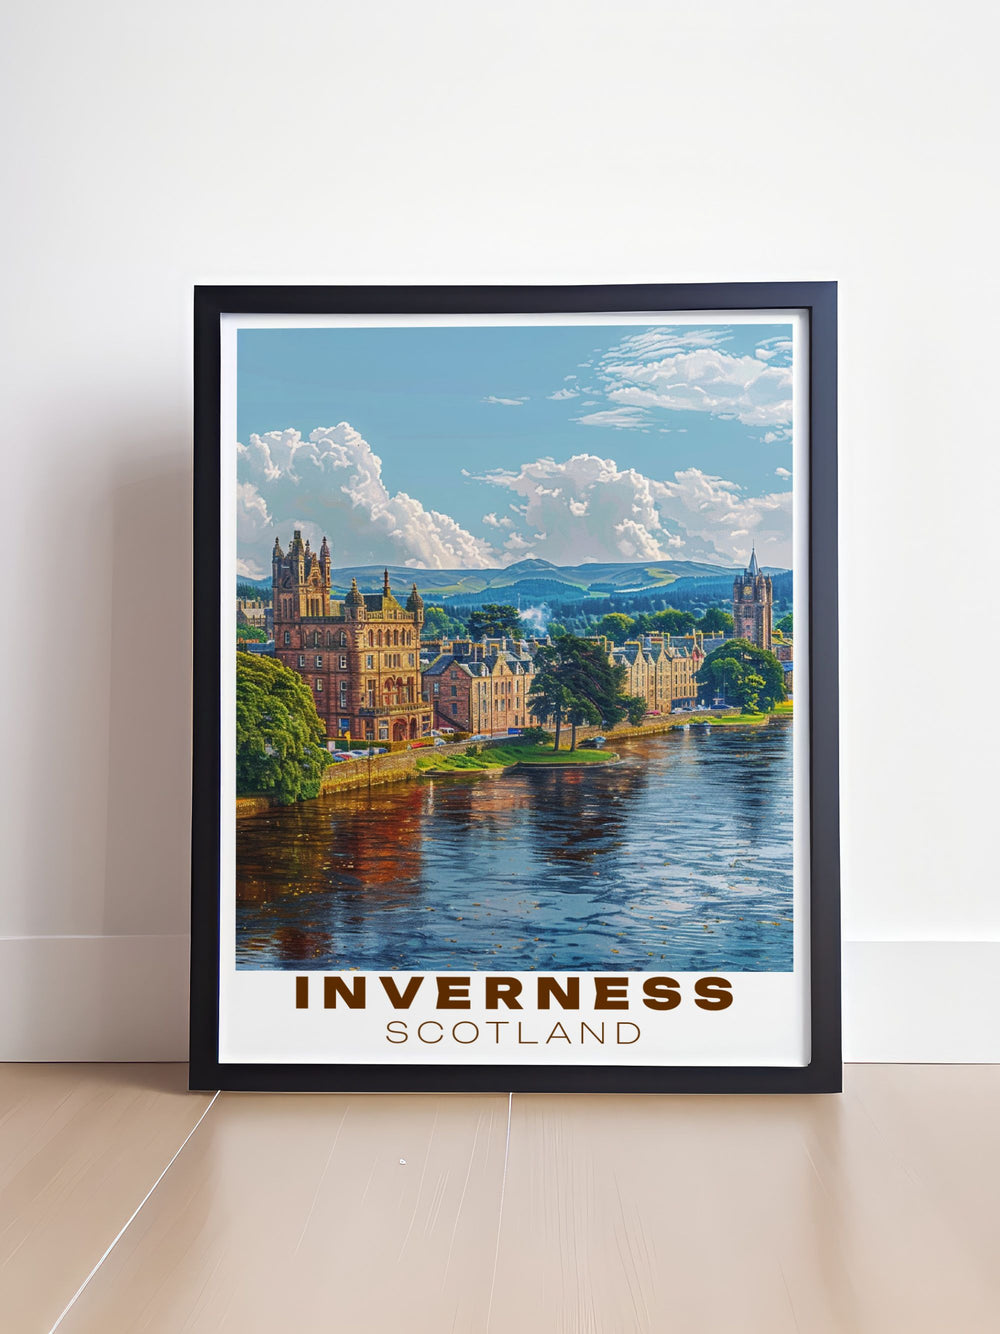 Fine art print of the Ness Islands, showcasing their lush greenery and peaceful Victorian bridges, ideal for a nature inspired decor.